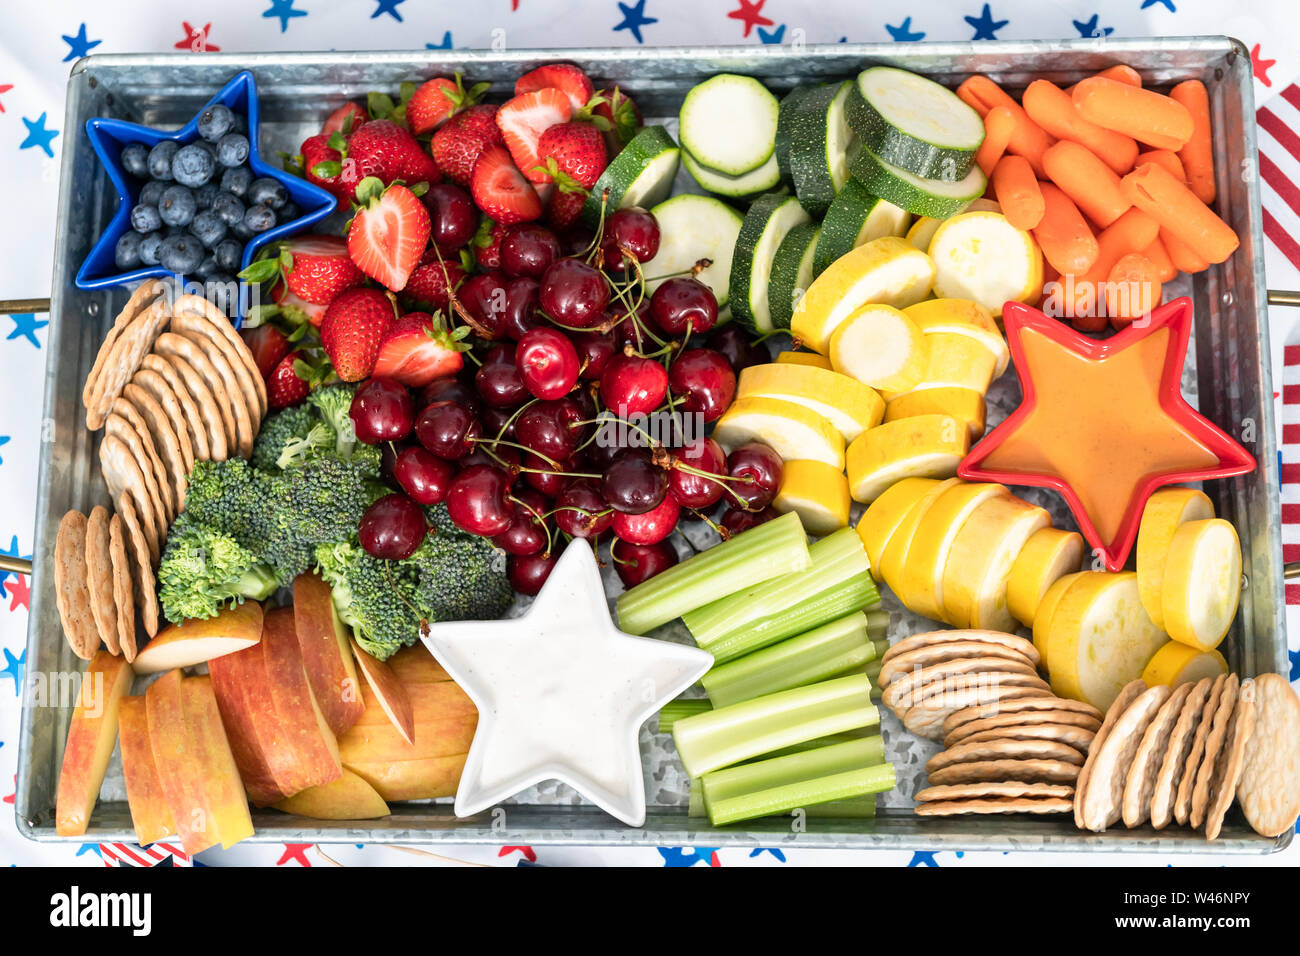 Snack tray with fresh fruits, vegetables, and dips at the July 4th  celebration party Stock Photo - Alamy